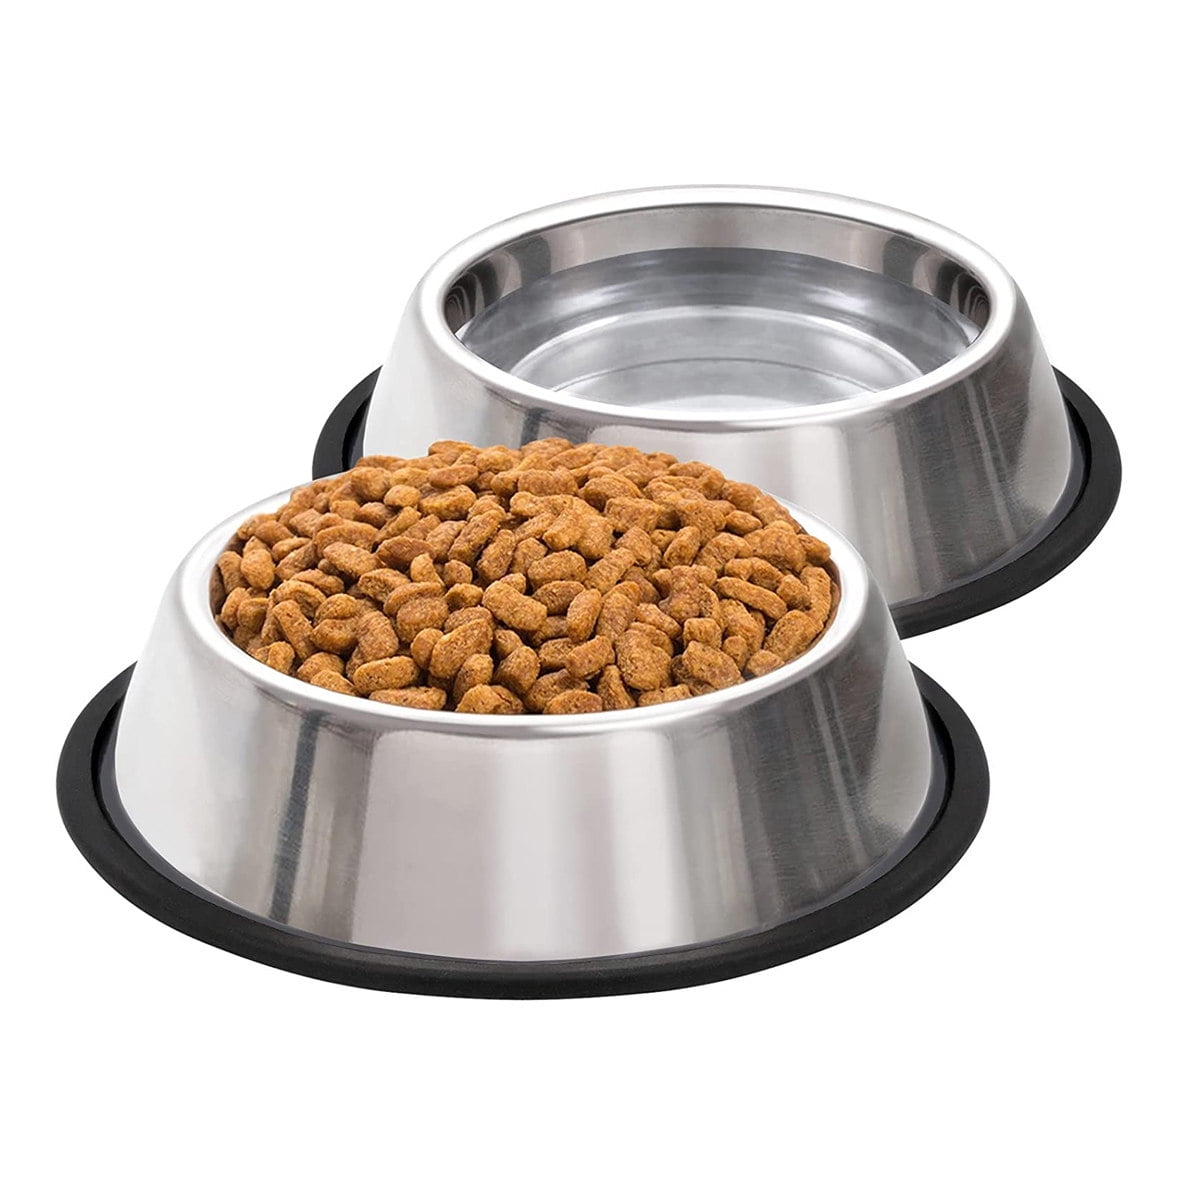 Pet Enjoy 2pcs Stainless Steel Dog Bowls,Durable Non Slip Metal Food Bowls for Dog,Pets Feeder Bowl and Water Bowl Perfect Choice for Dog Puppy Cat